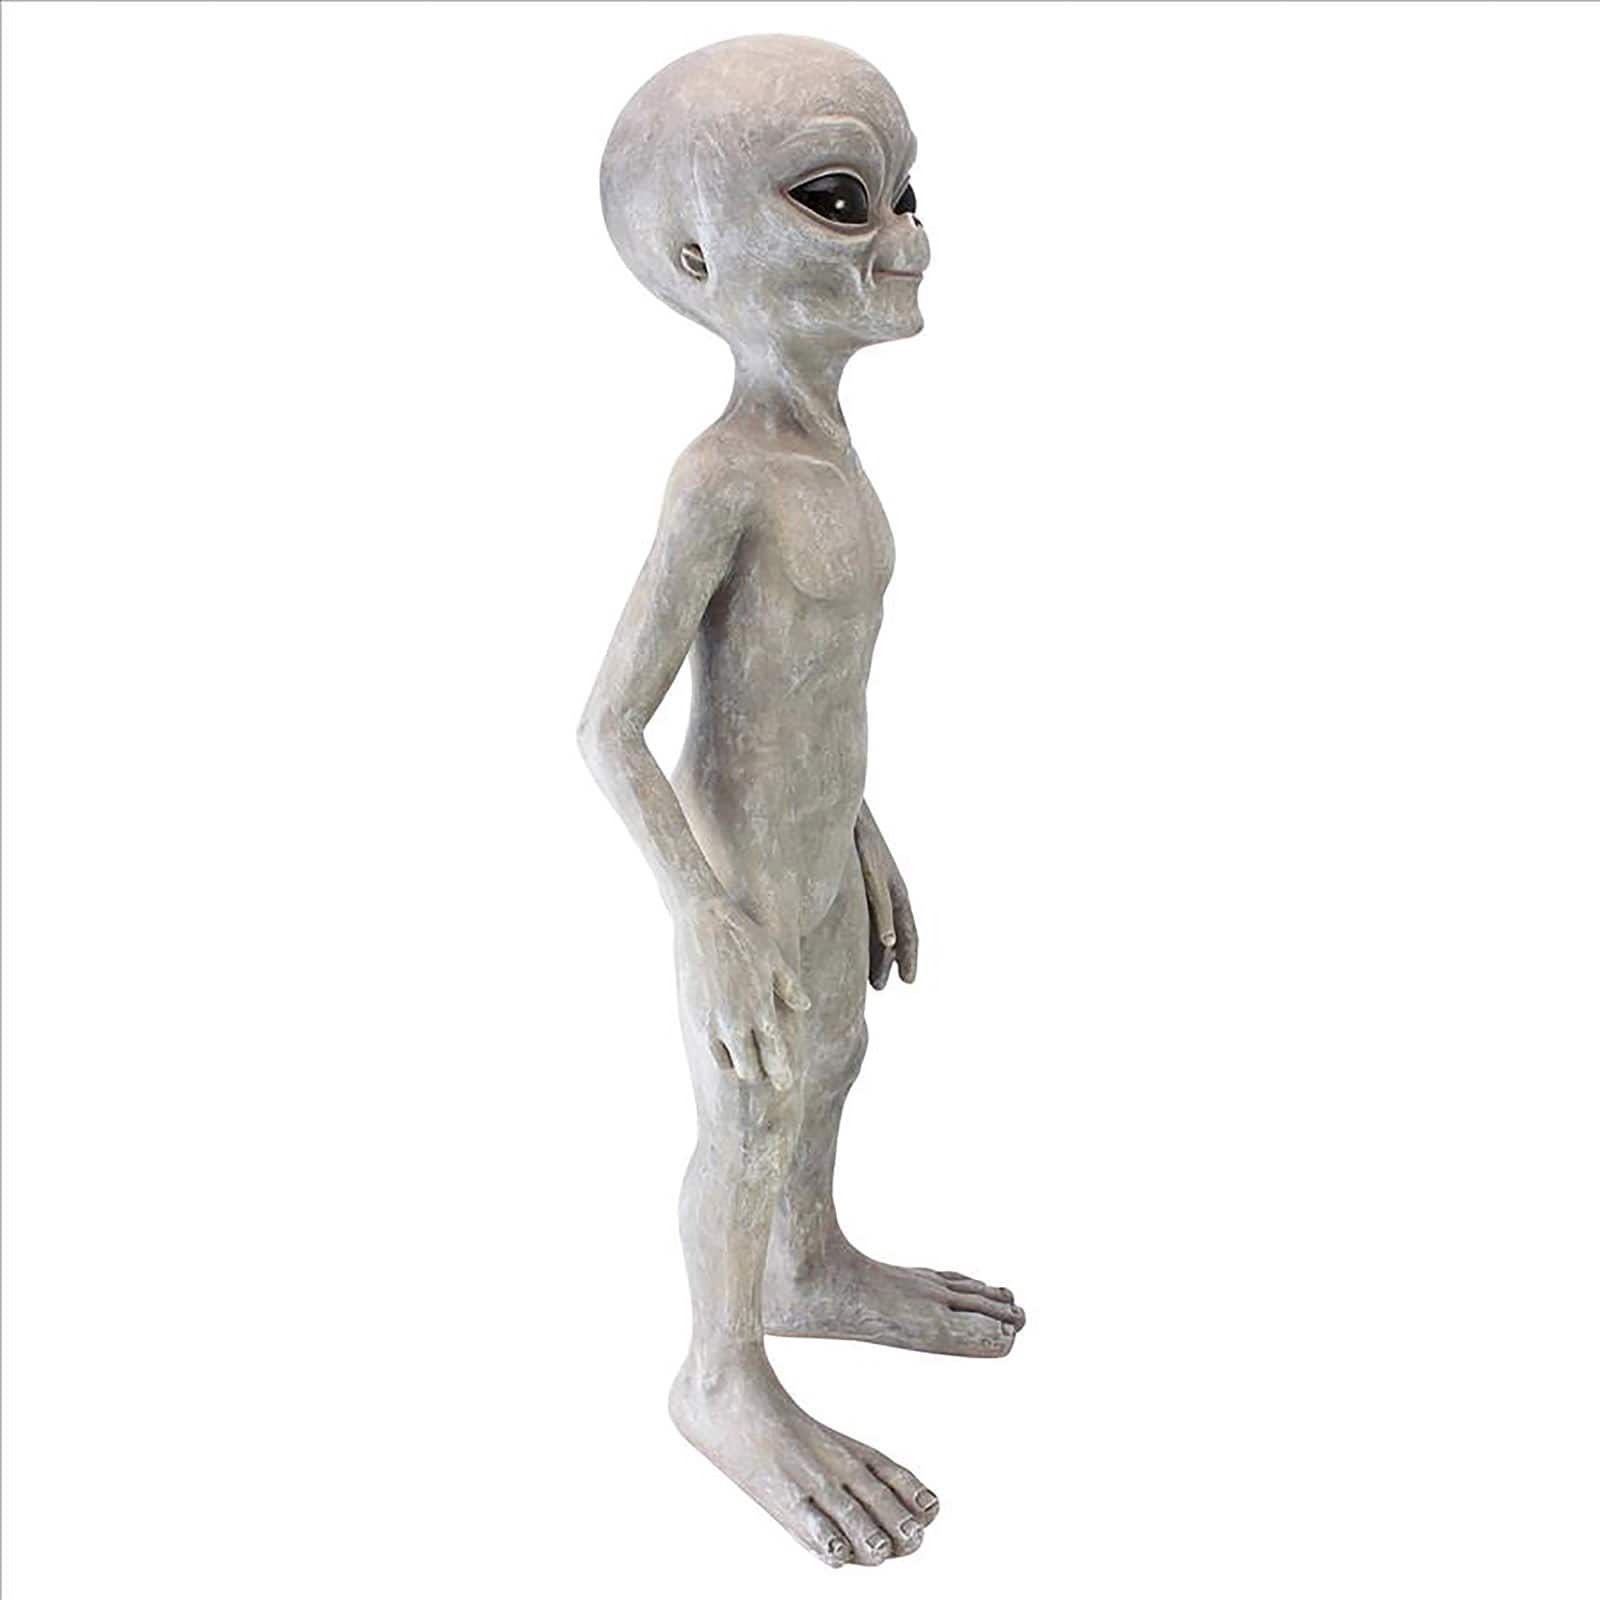 Design Toscano Large The Out-of-this-World Alien Extra Terrestrial Statue